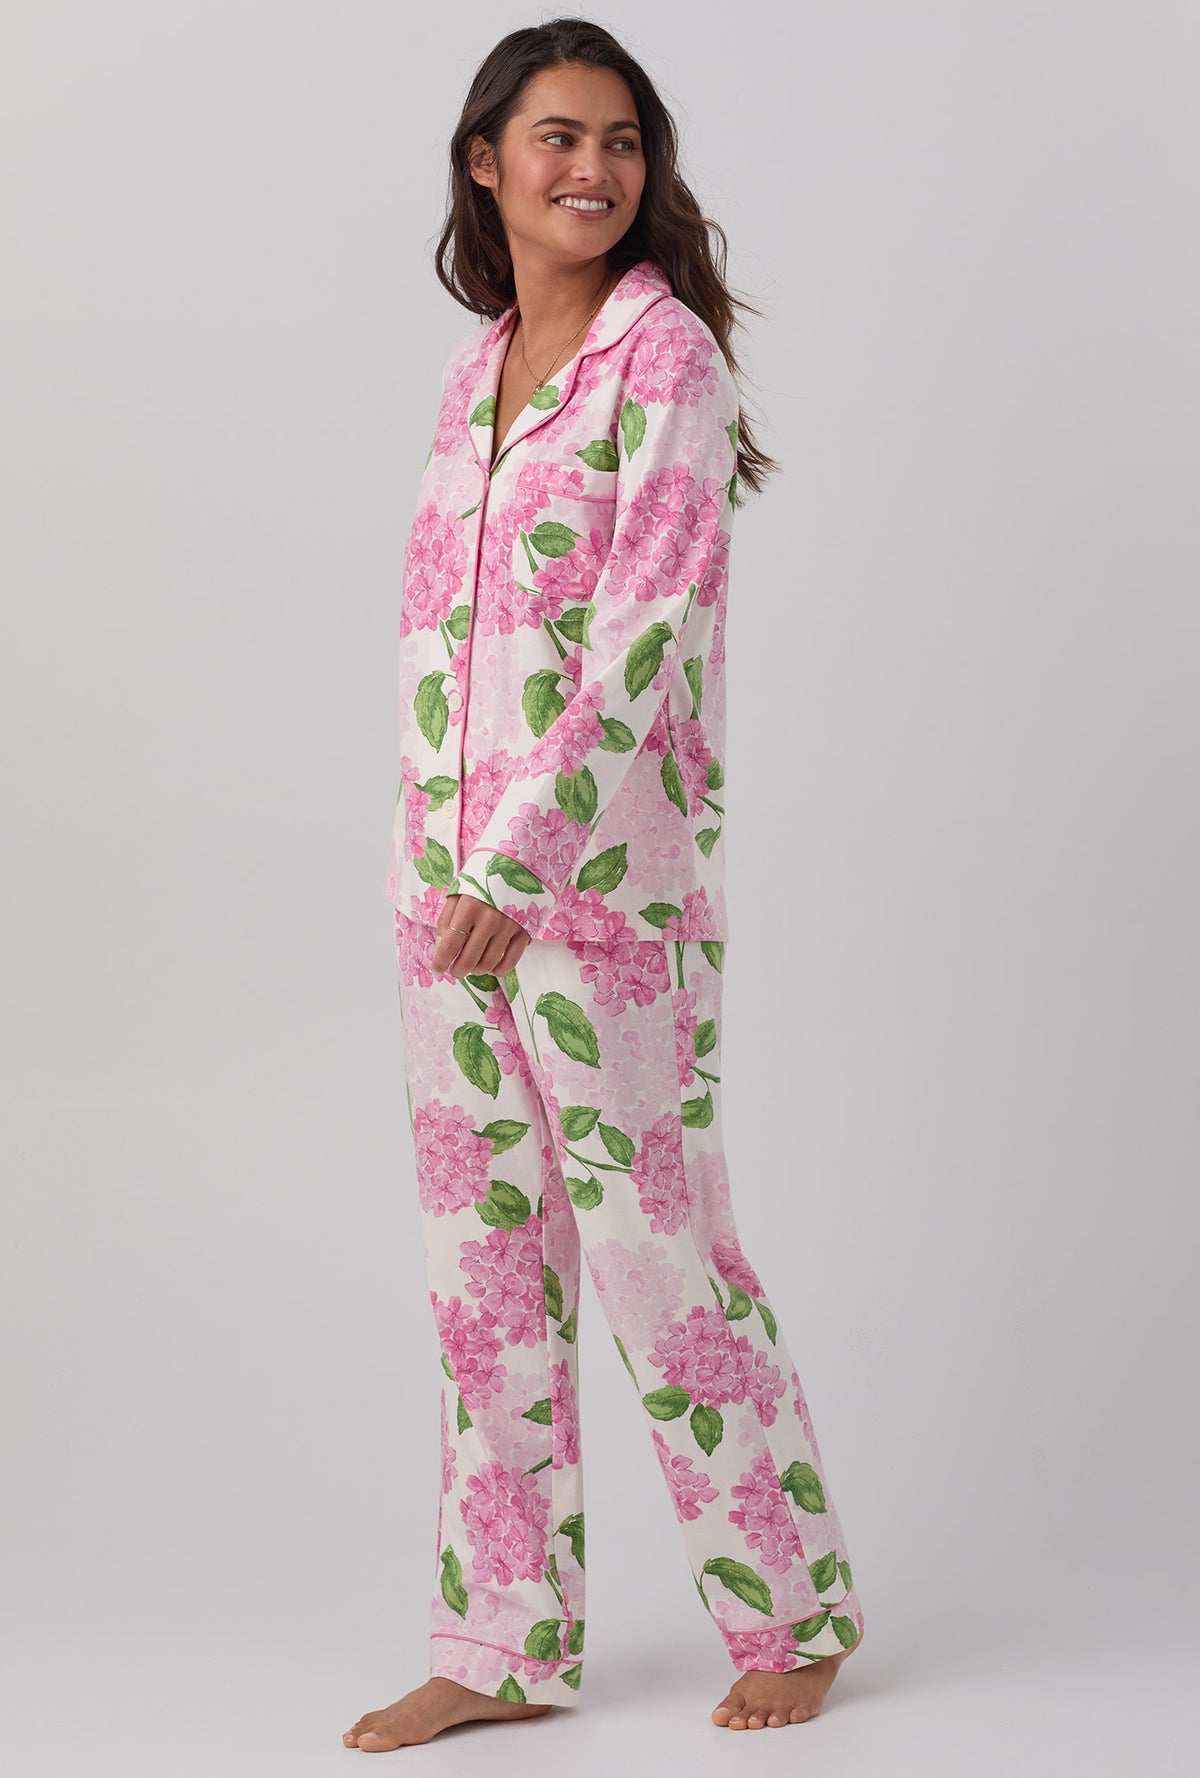 A lady wearing pink Long Sleeve Classic Stretch Jersey PJ Set with Grand Hydrangea print